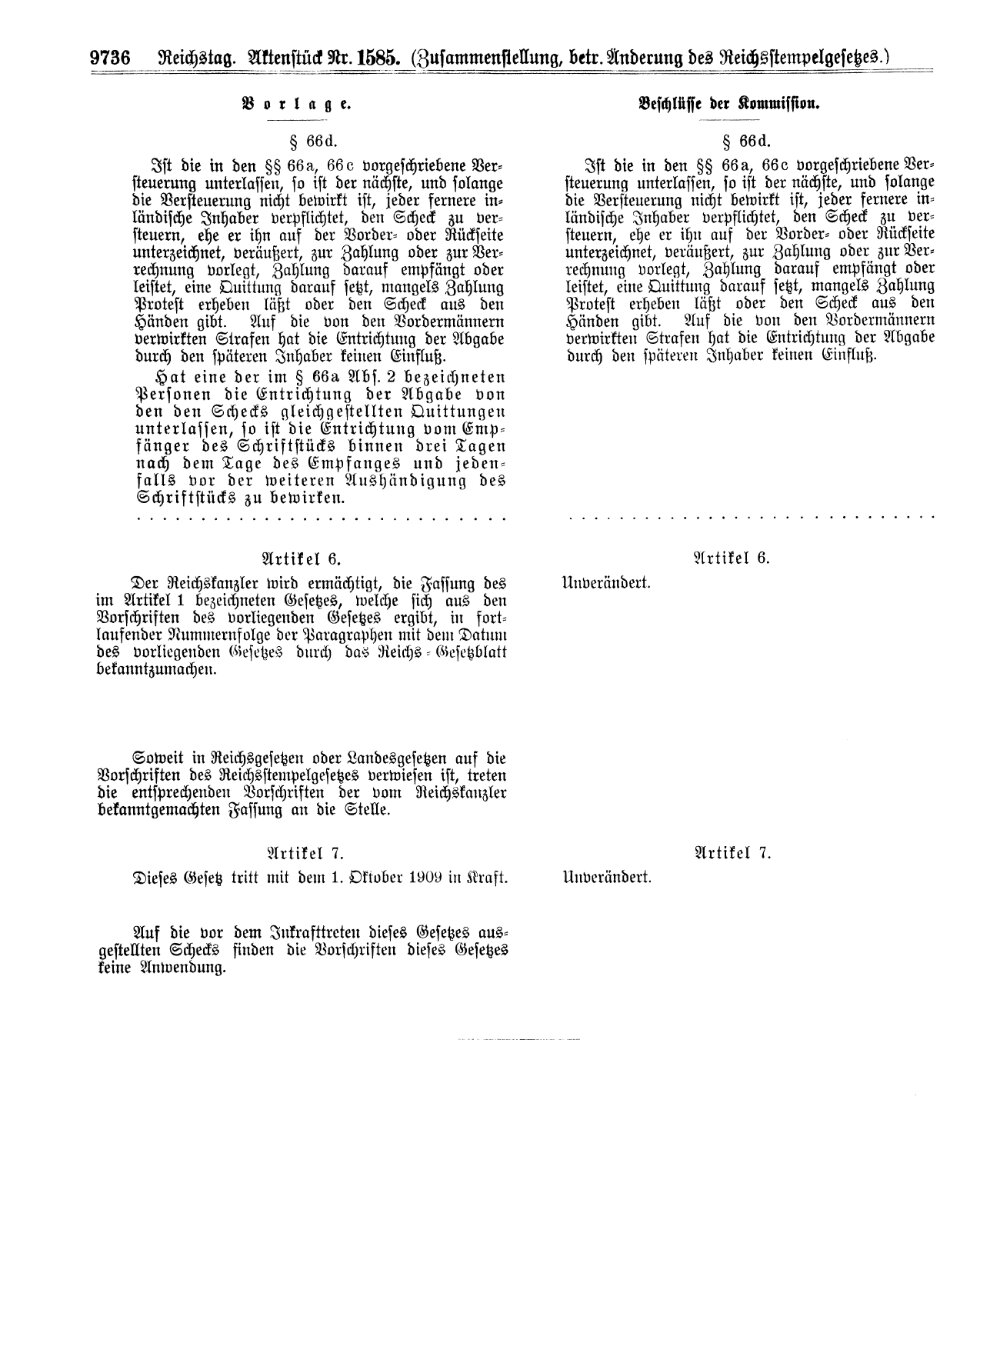 Scan of page 9736